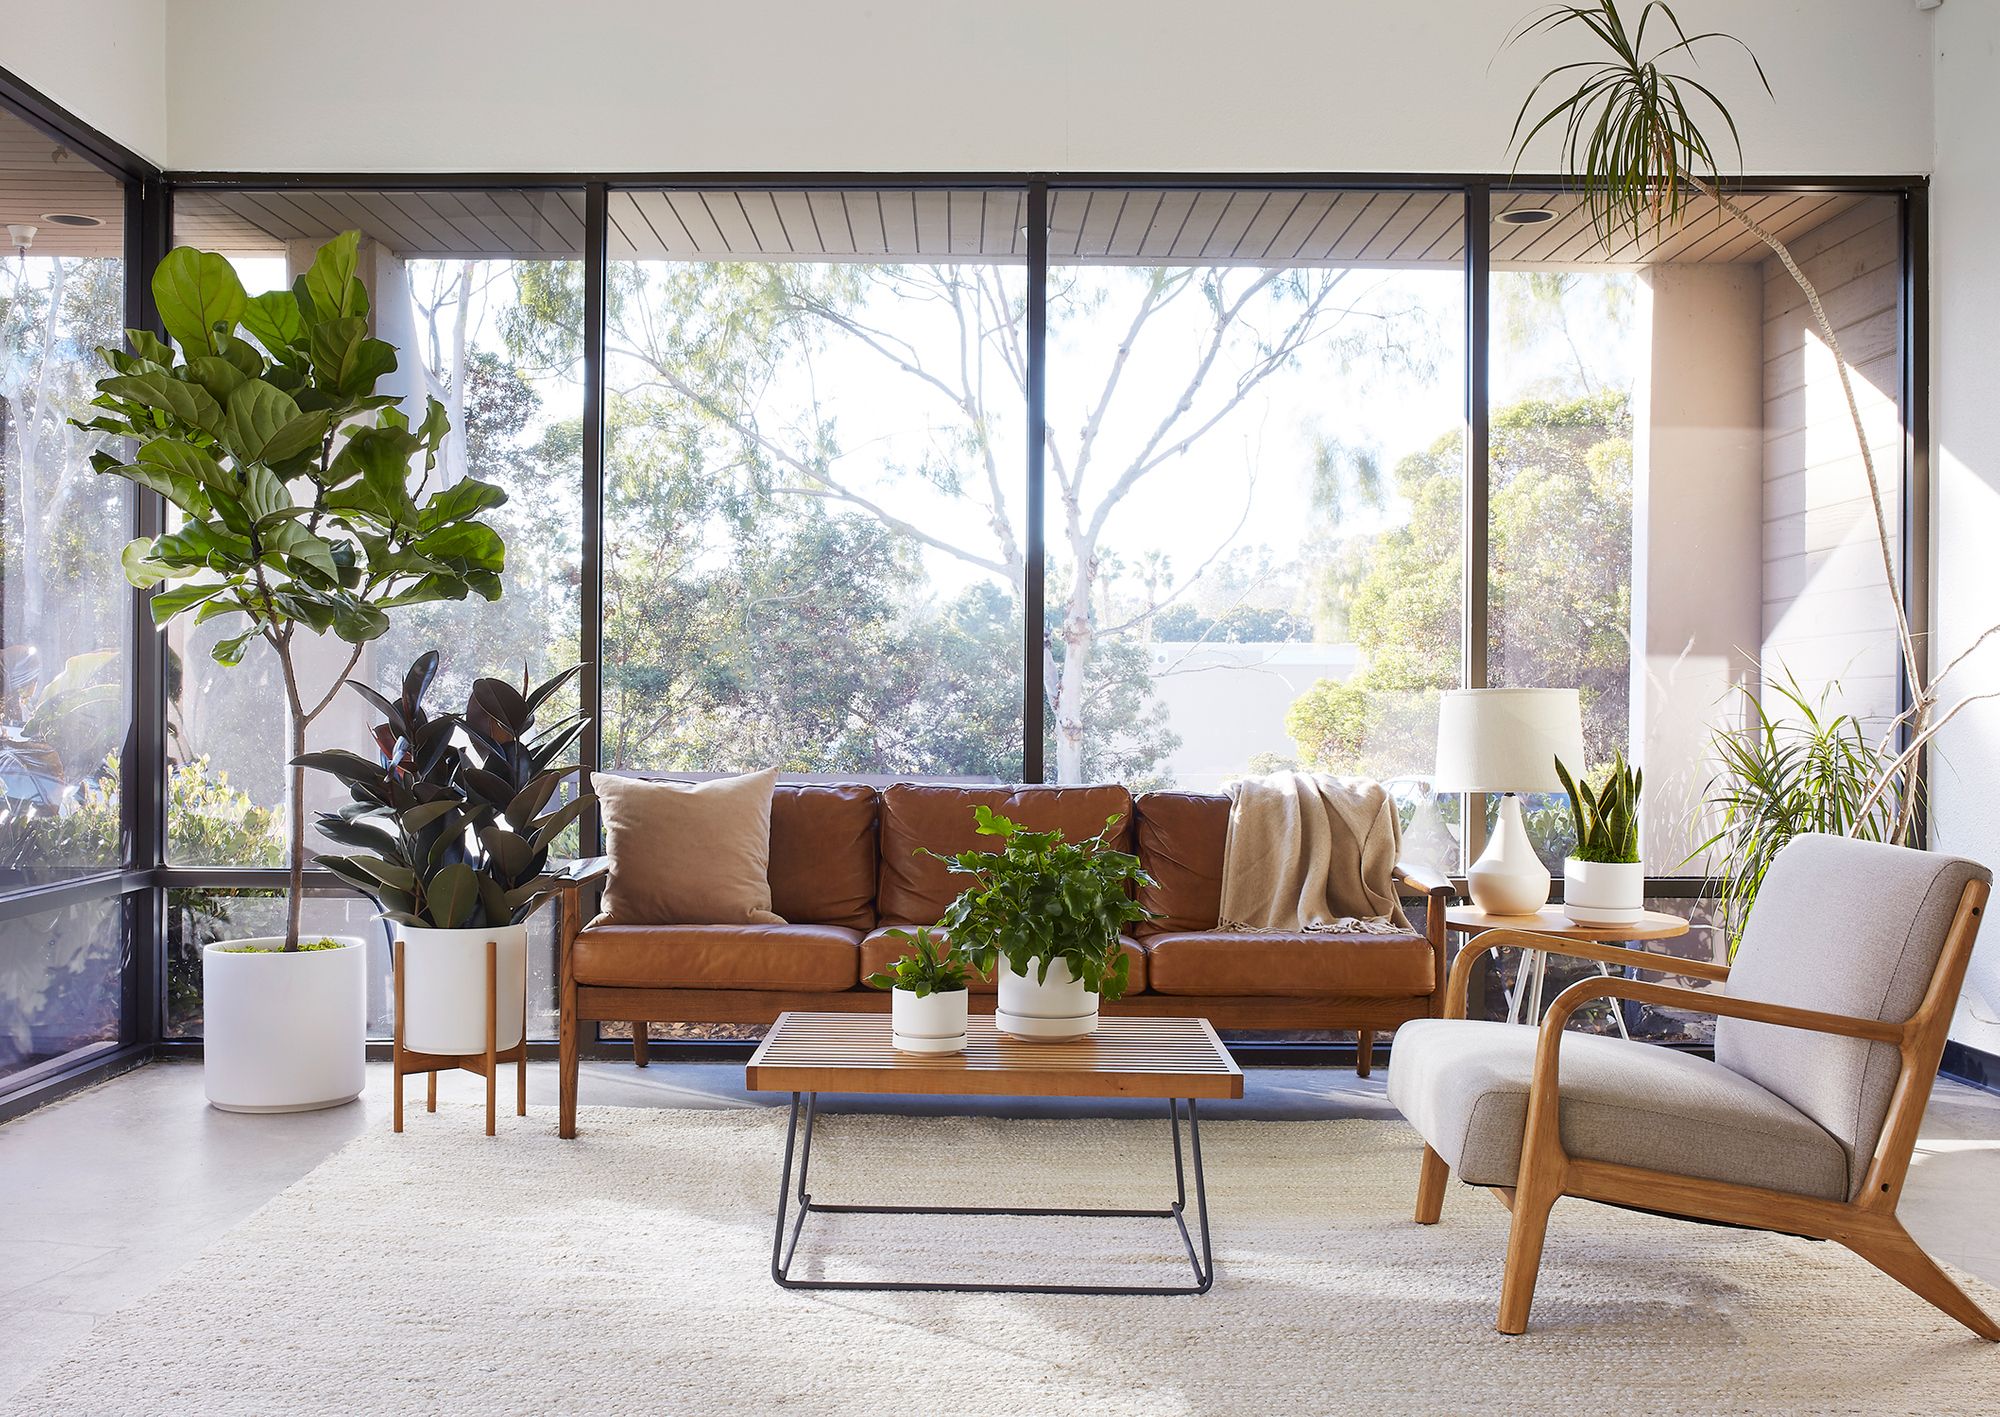 Styling The Mid Century Living Room with The Ornamental Plants